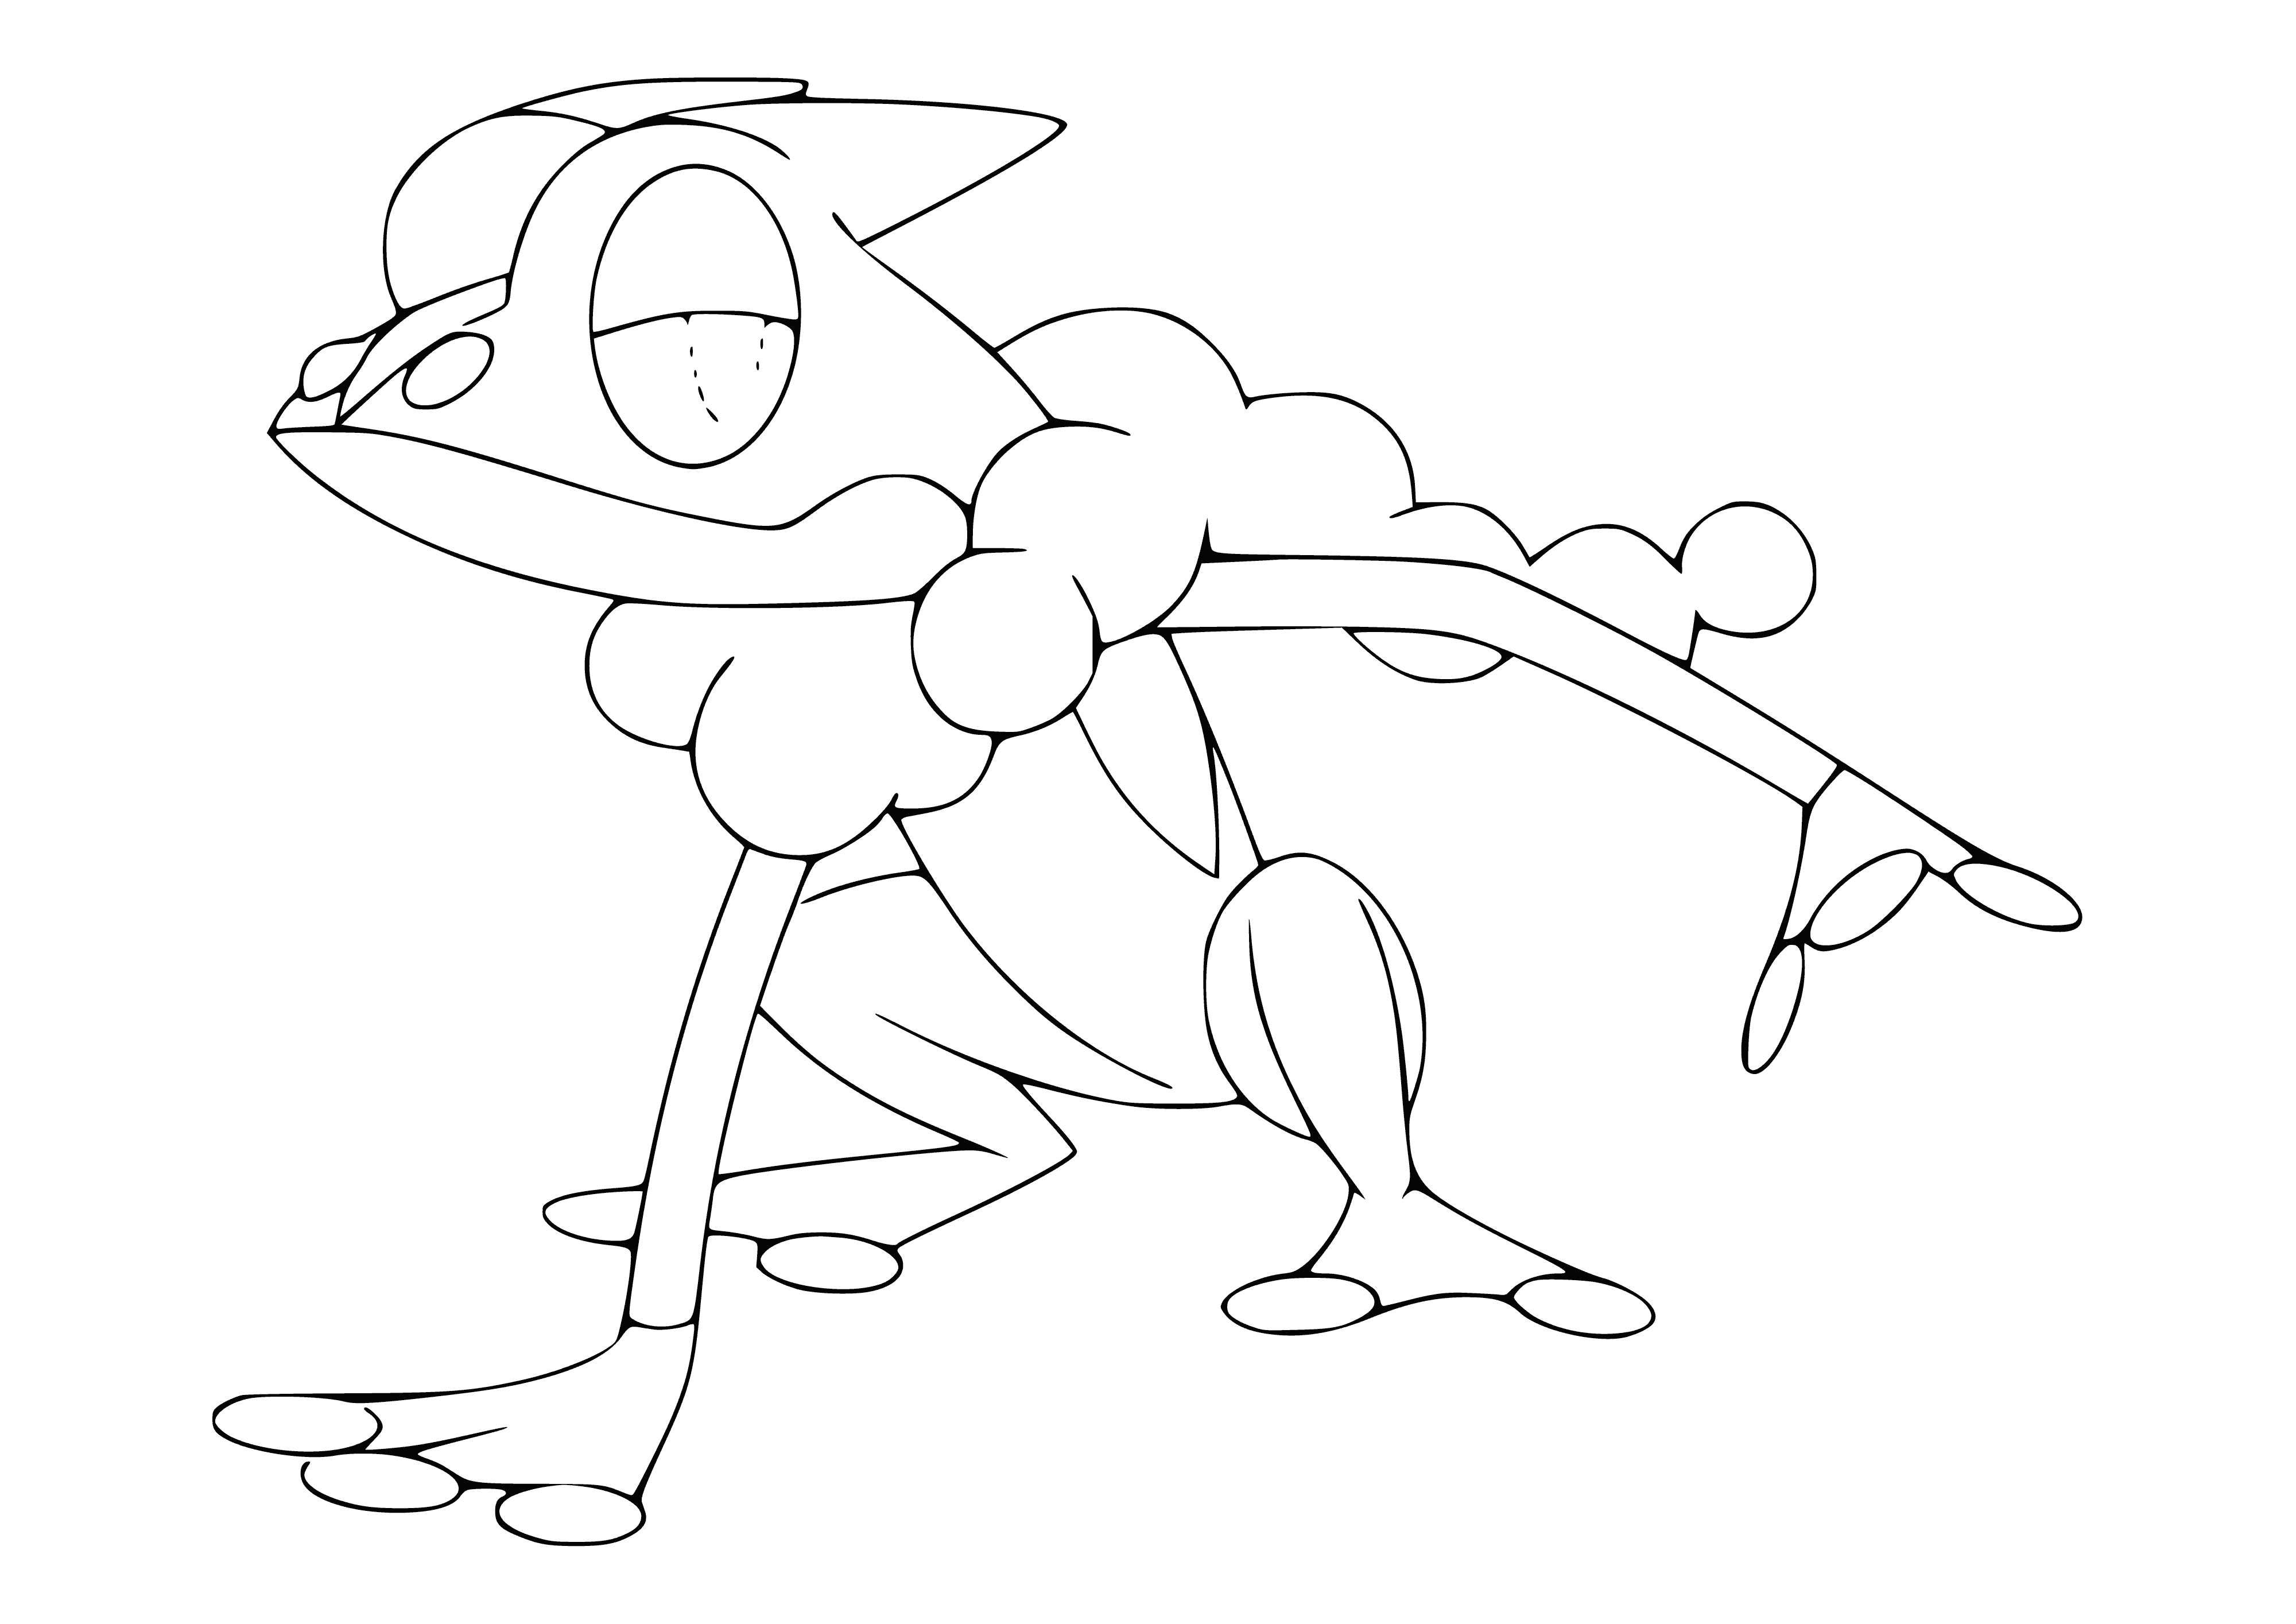 coloring page: Small, squat frog Pokemon with blue body & reddish-brown spots. Has large, webbed hands & feet & cream-colored belly. Has yellow eyes & thin appendages on top of head.